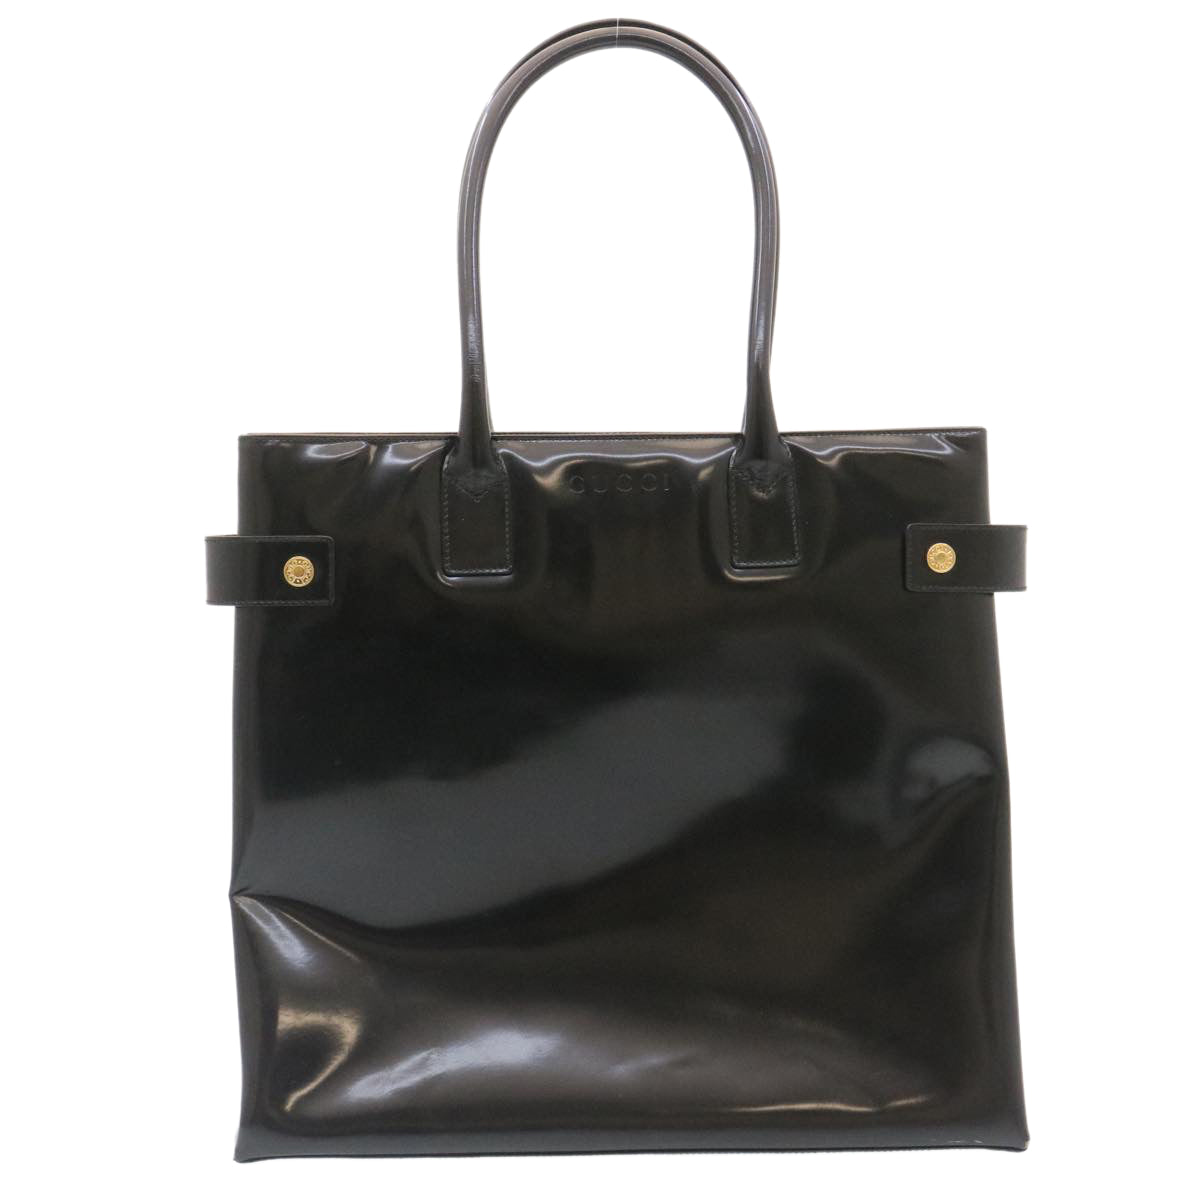 GUCCI Bamboo Tote Bag Leather Black Auth ar6293